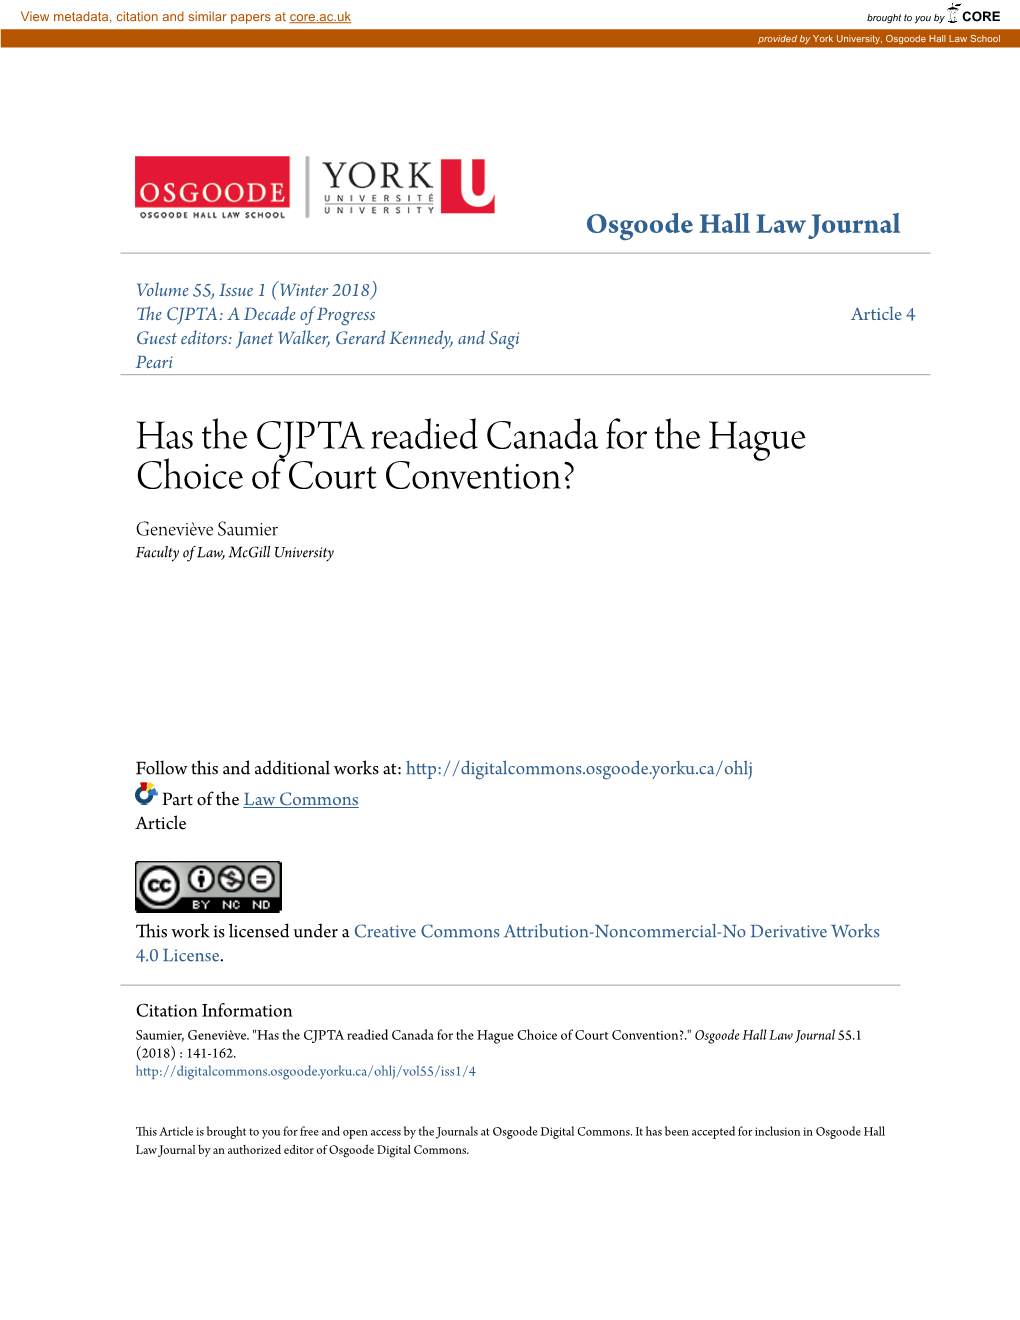 Has the CJPTA Readied Canada for the Hague Choice of Court Convention? Geneviève Saumier Faculty of Law, Mcgill University